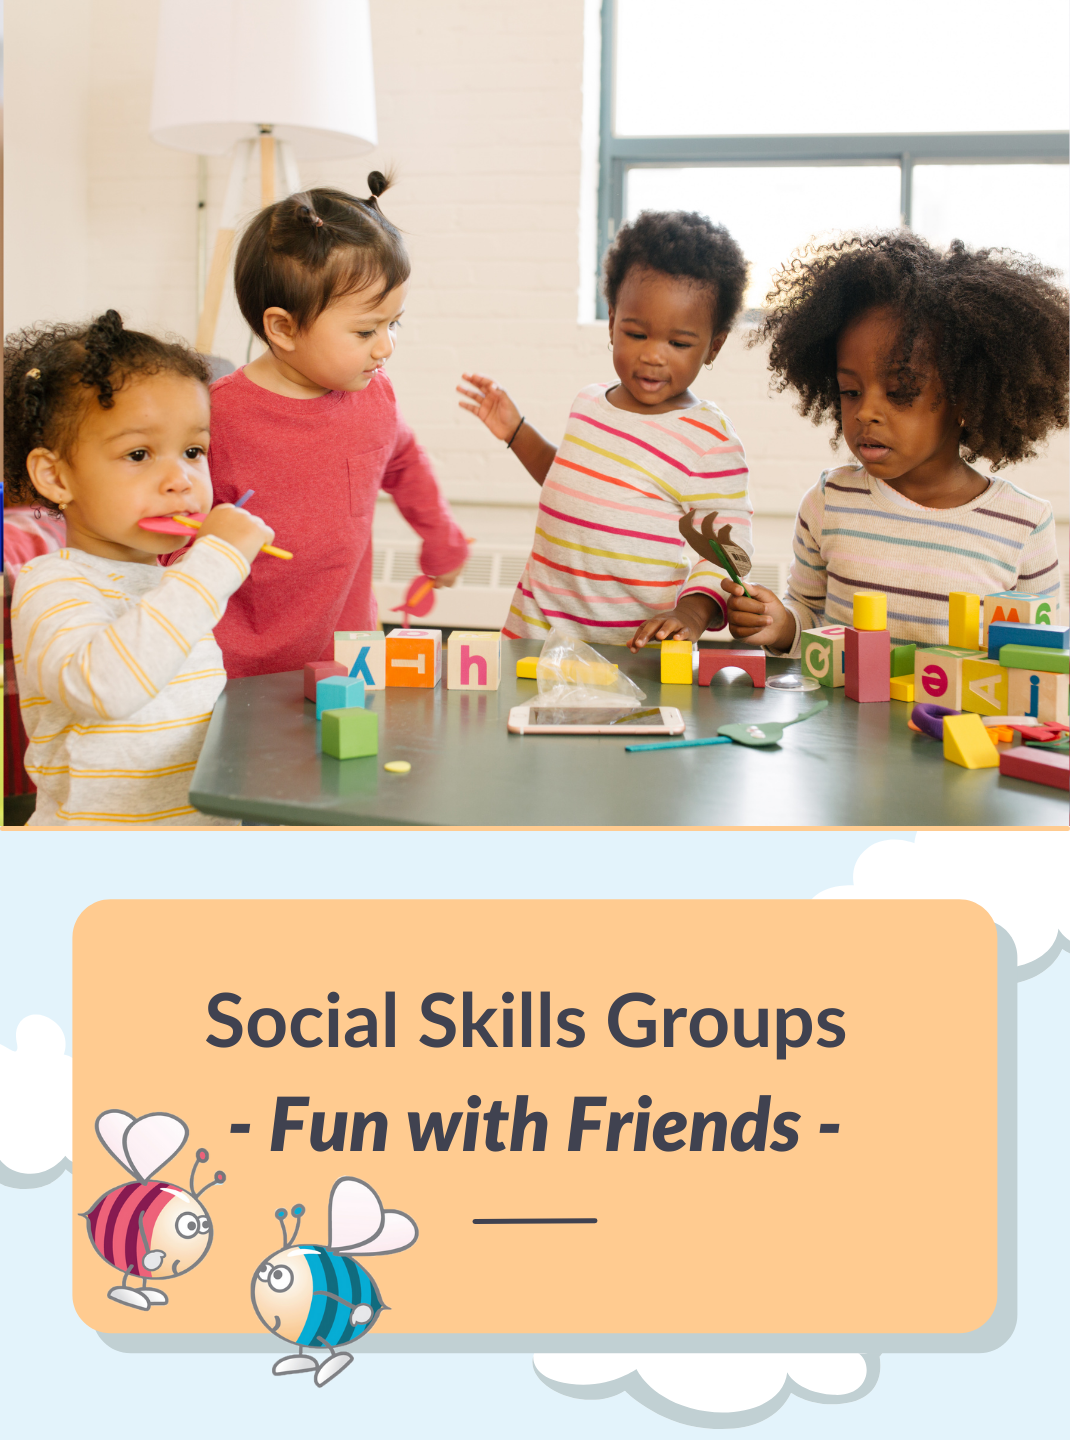 Social Skills Groups - Fun with Friends